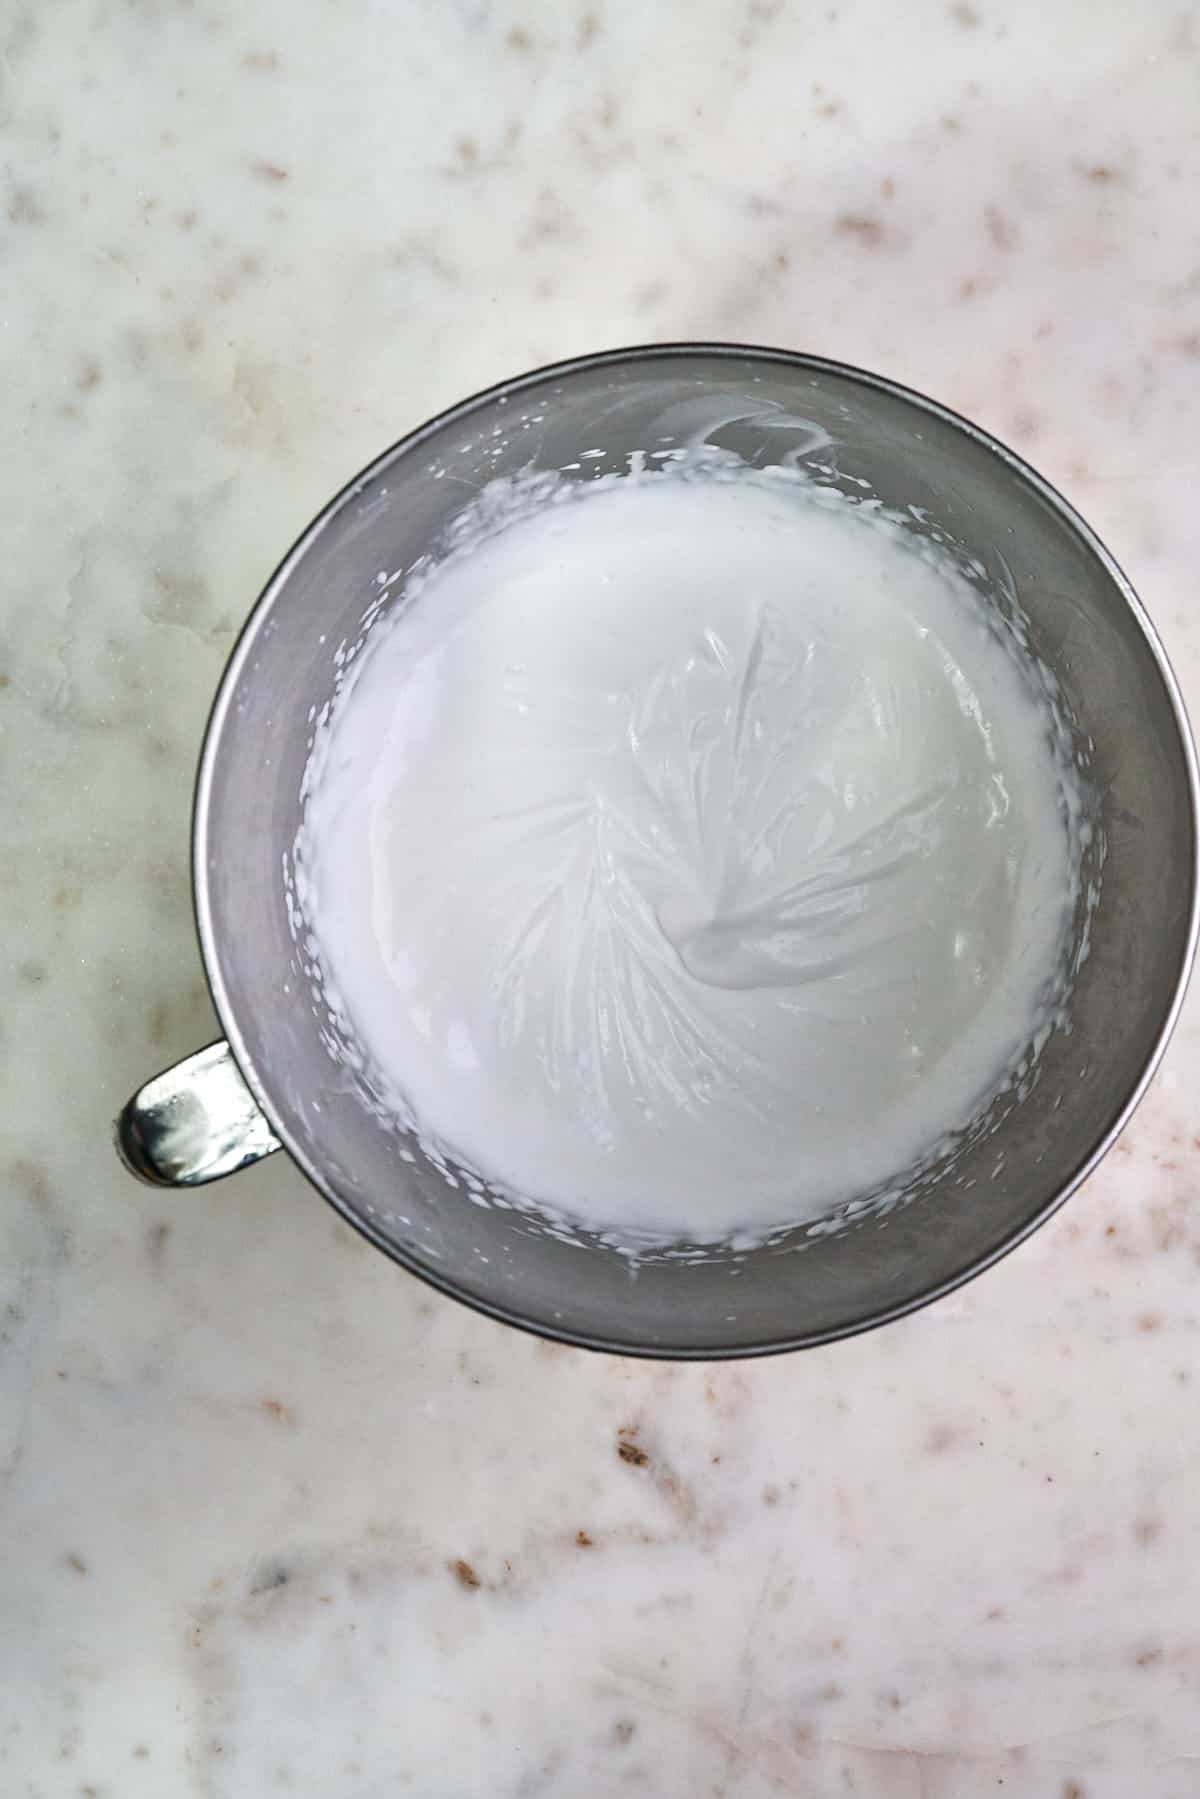 Texture of coconut whipped cream in a mixer bowl.